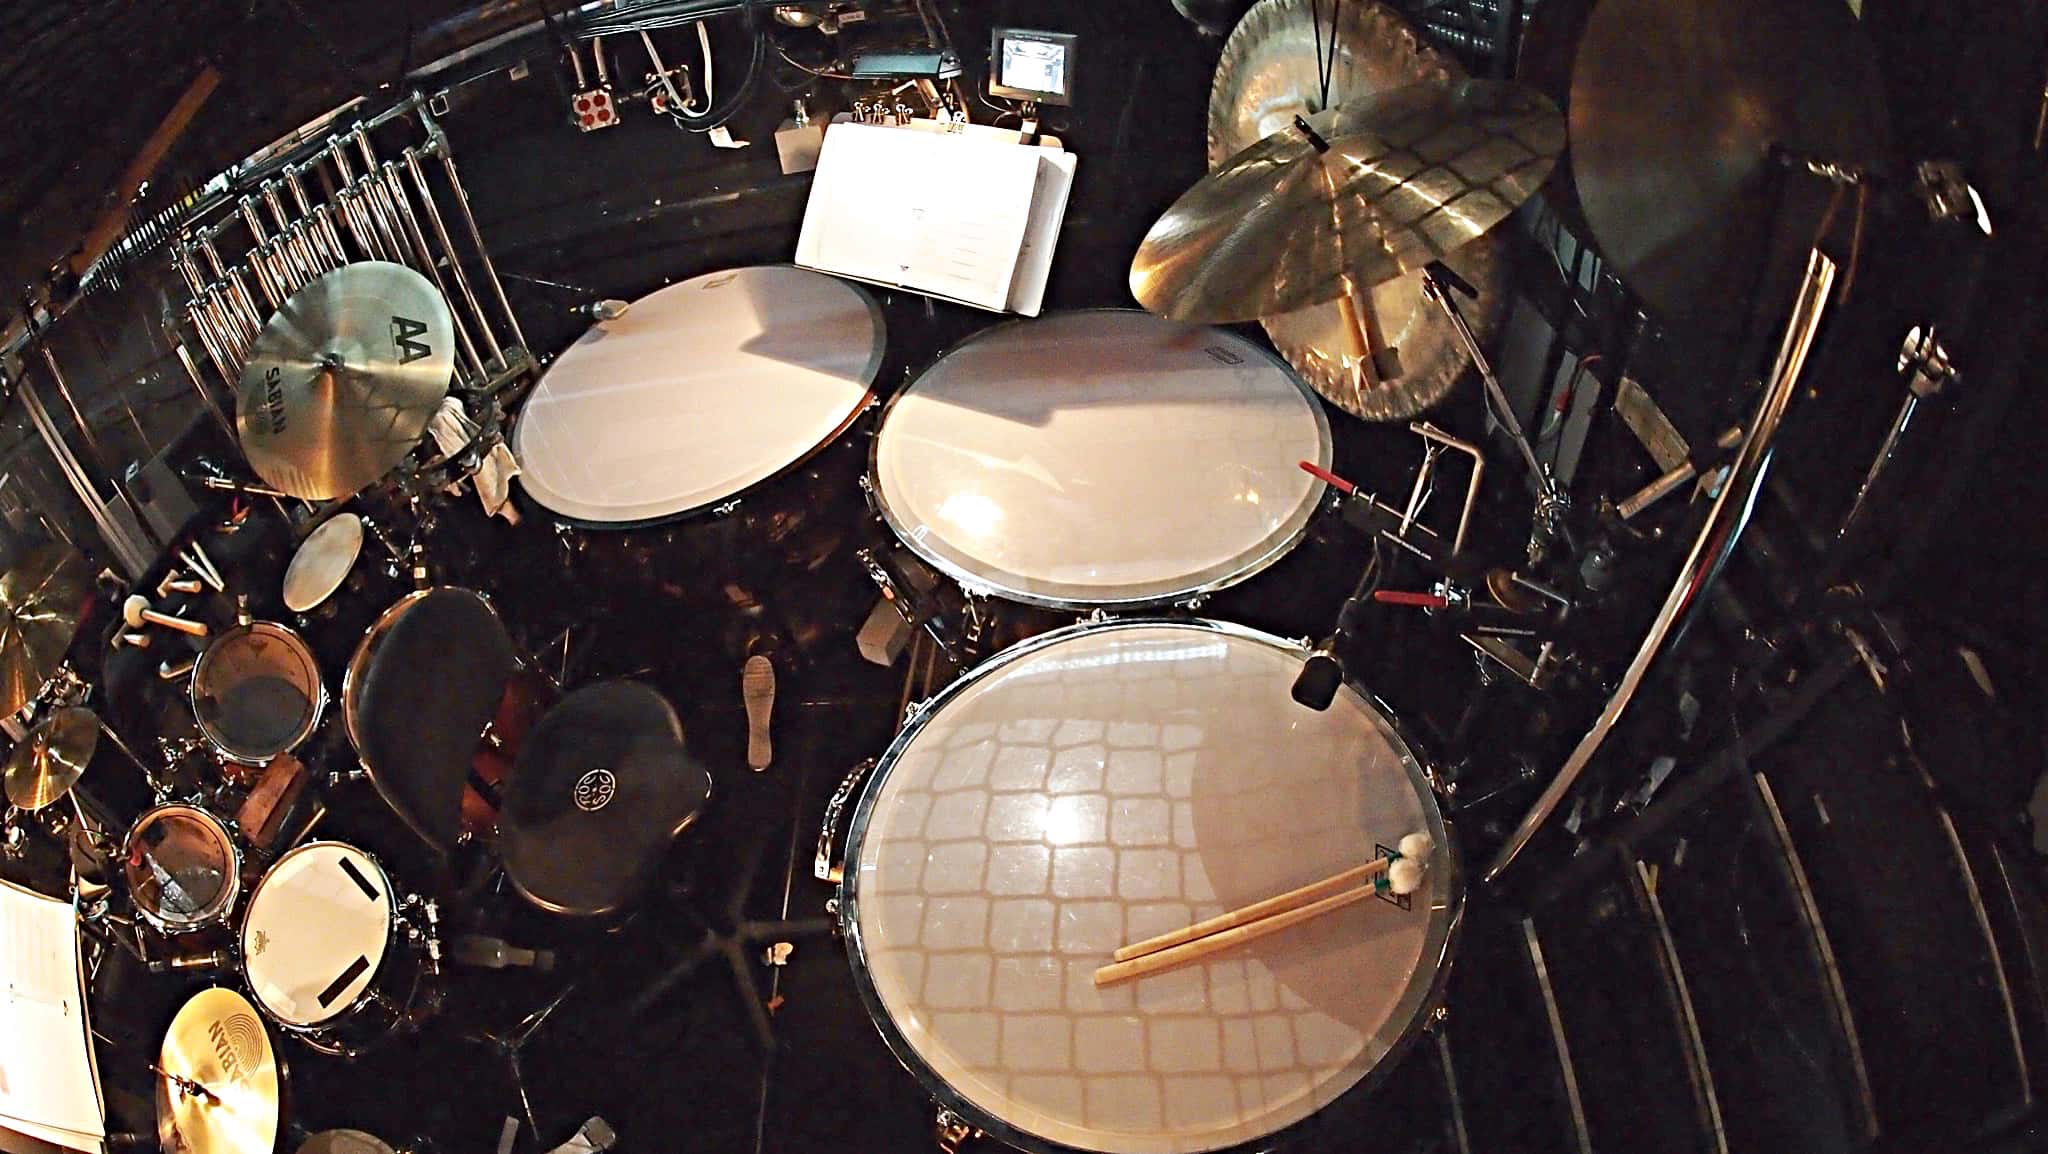 Paul Hansen's setup for The Hunchback of Notre Dame at the 5th Avenue Theatre in Seattle, Washington.